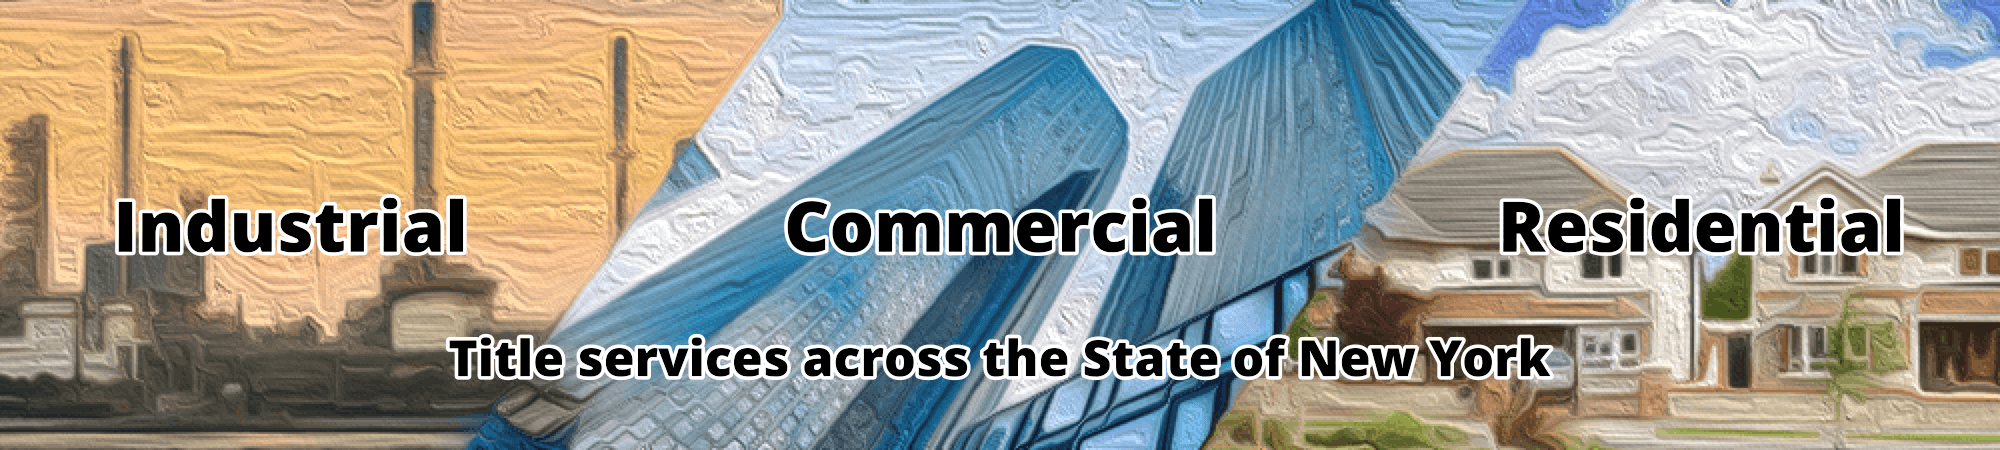 Industrial Commercial Residential Title Services Across the State of New York Banner